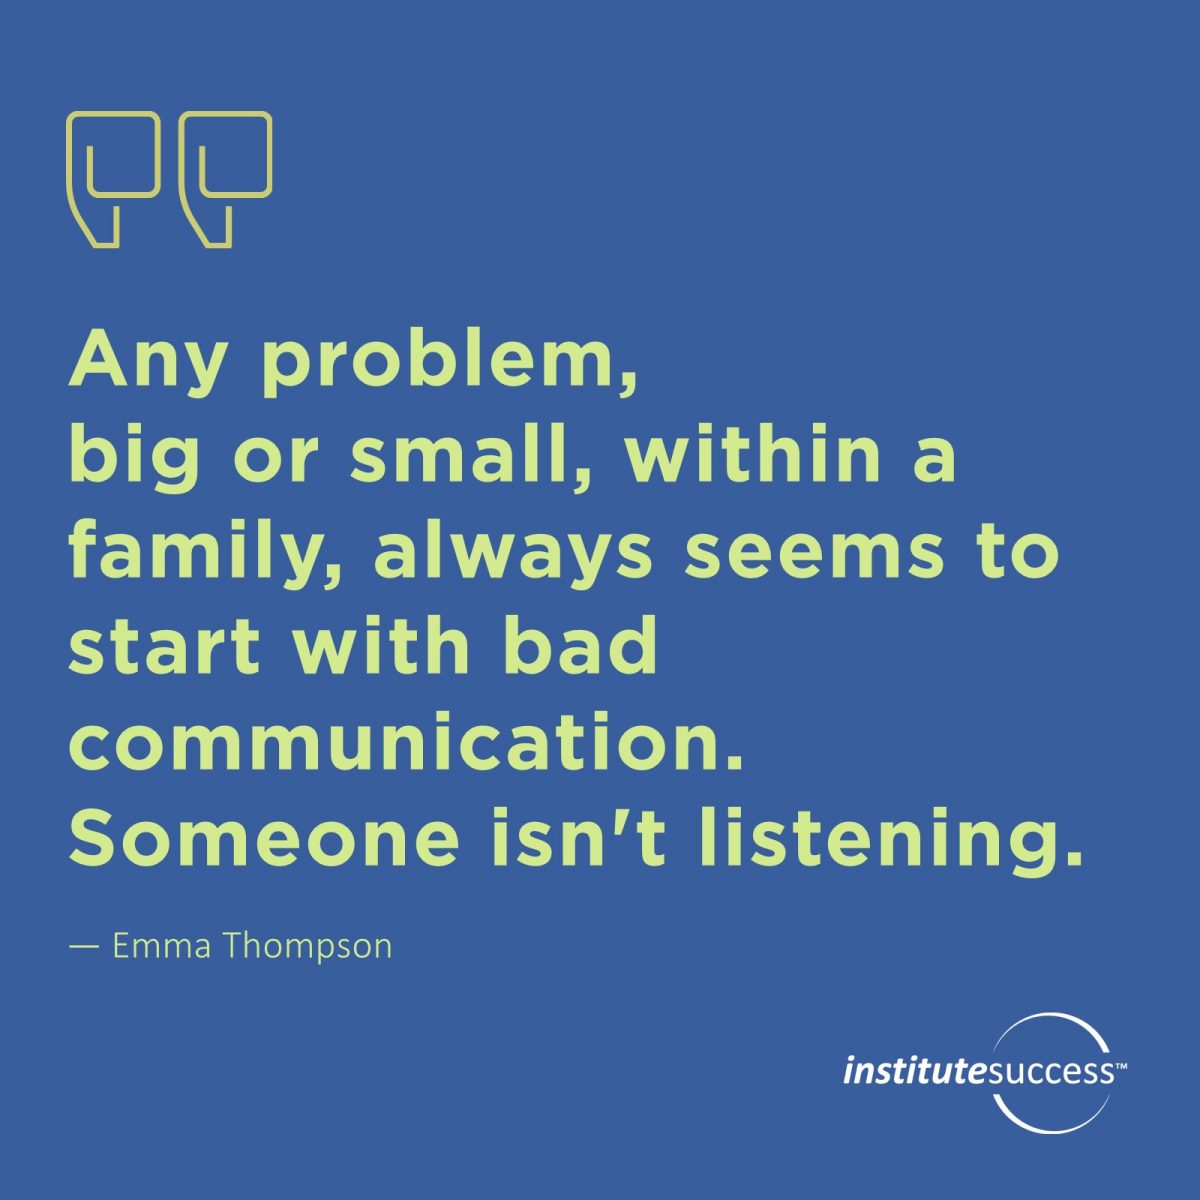 Any problem, big or small, within a family, always seems to start with bad communication. Someone isn’t listening. – Emma Thompson